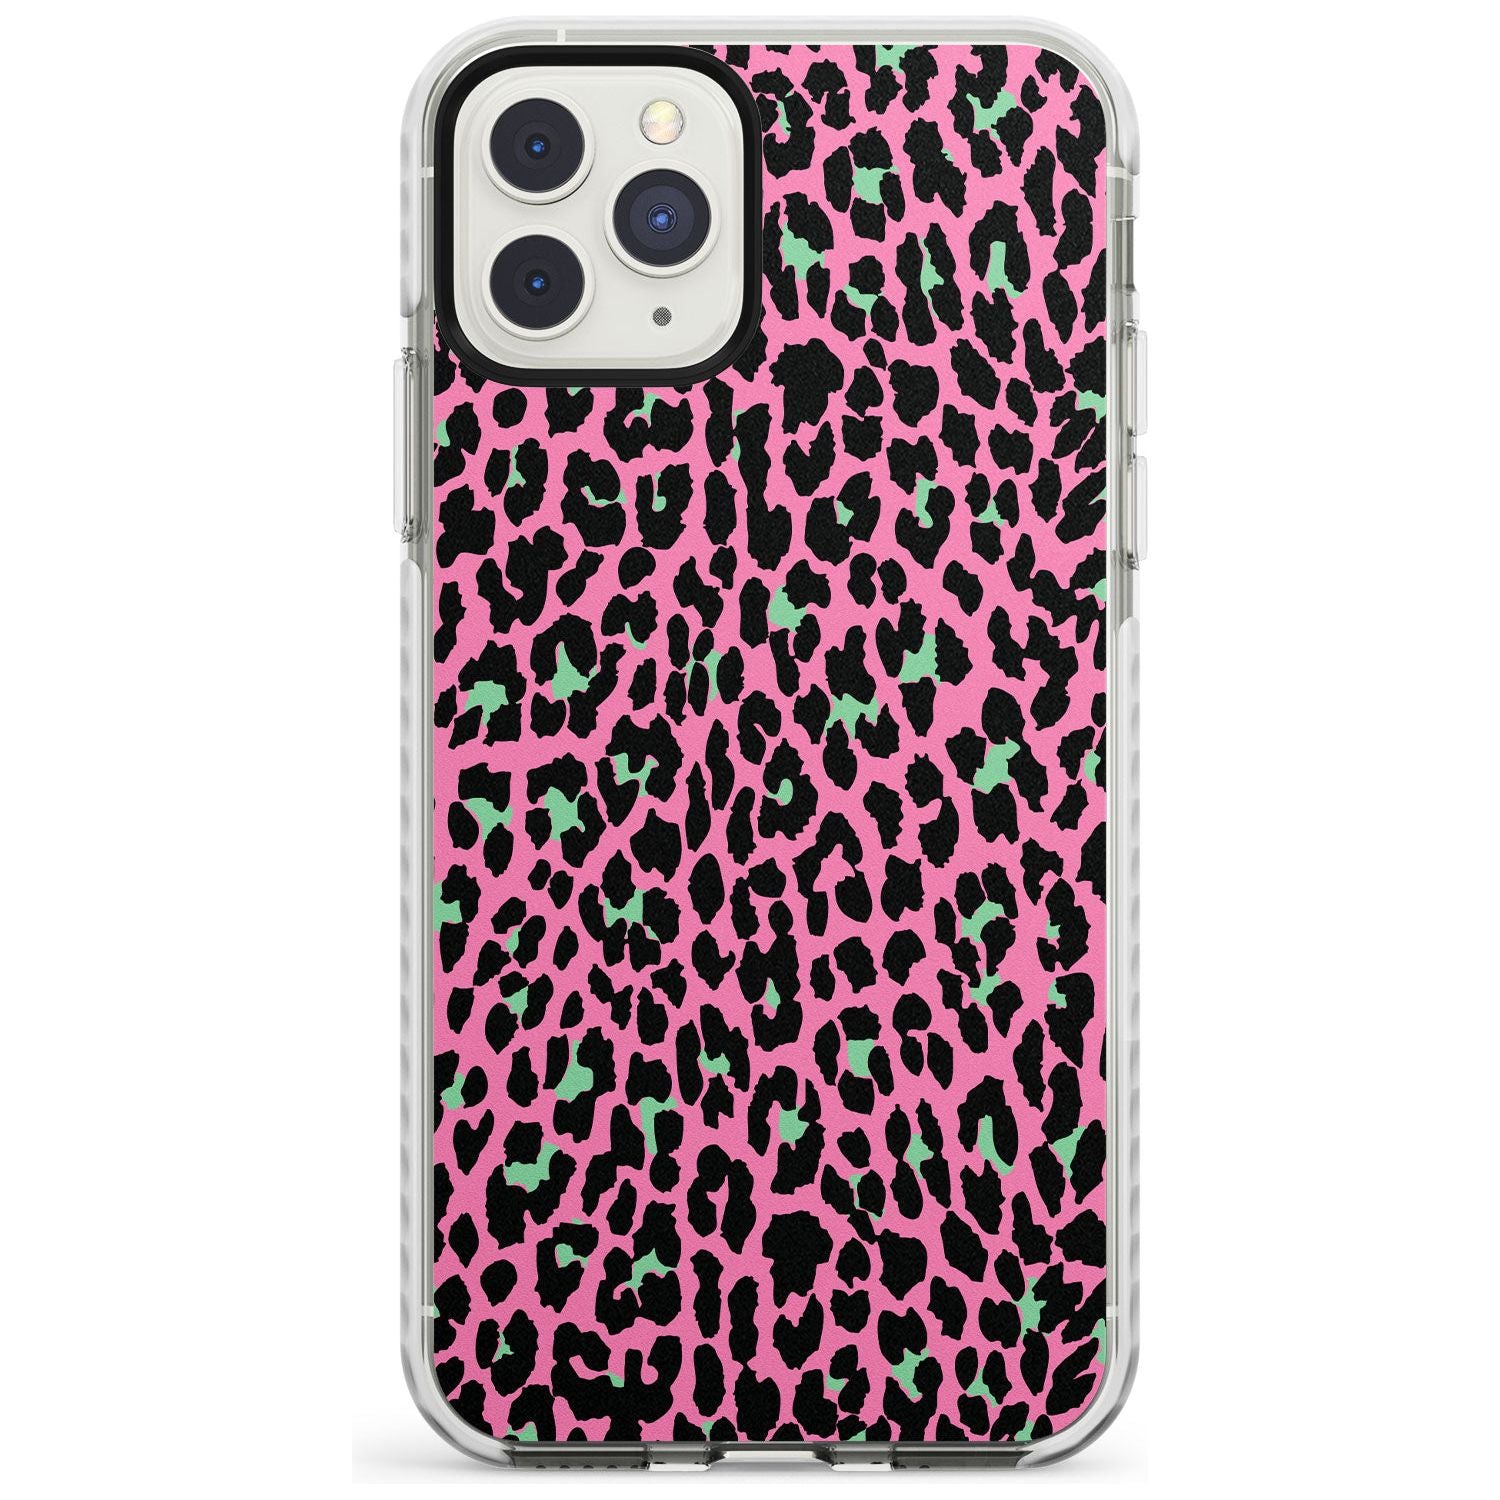 Green on Pink Leopard Print Pattern Impact Phone Case for iPhone 11 Pro Max